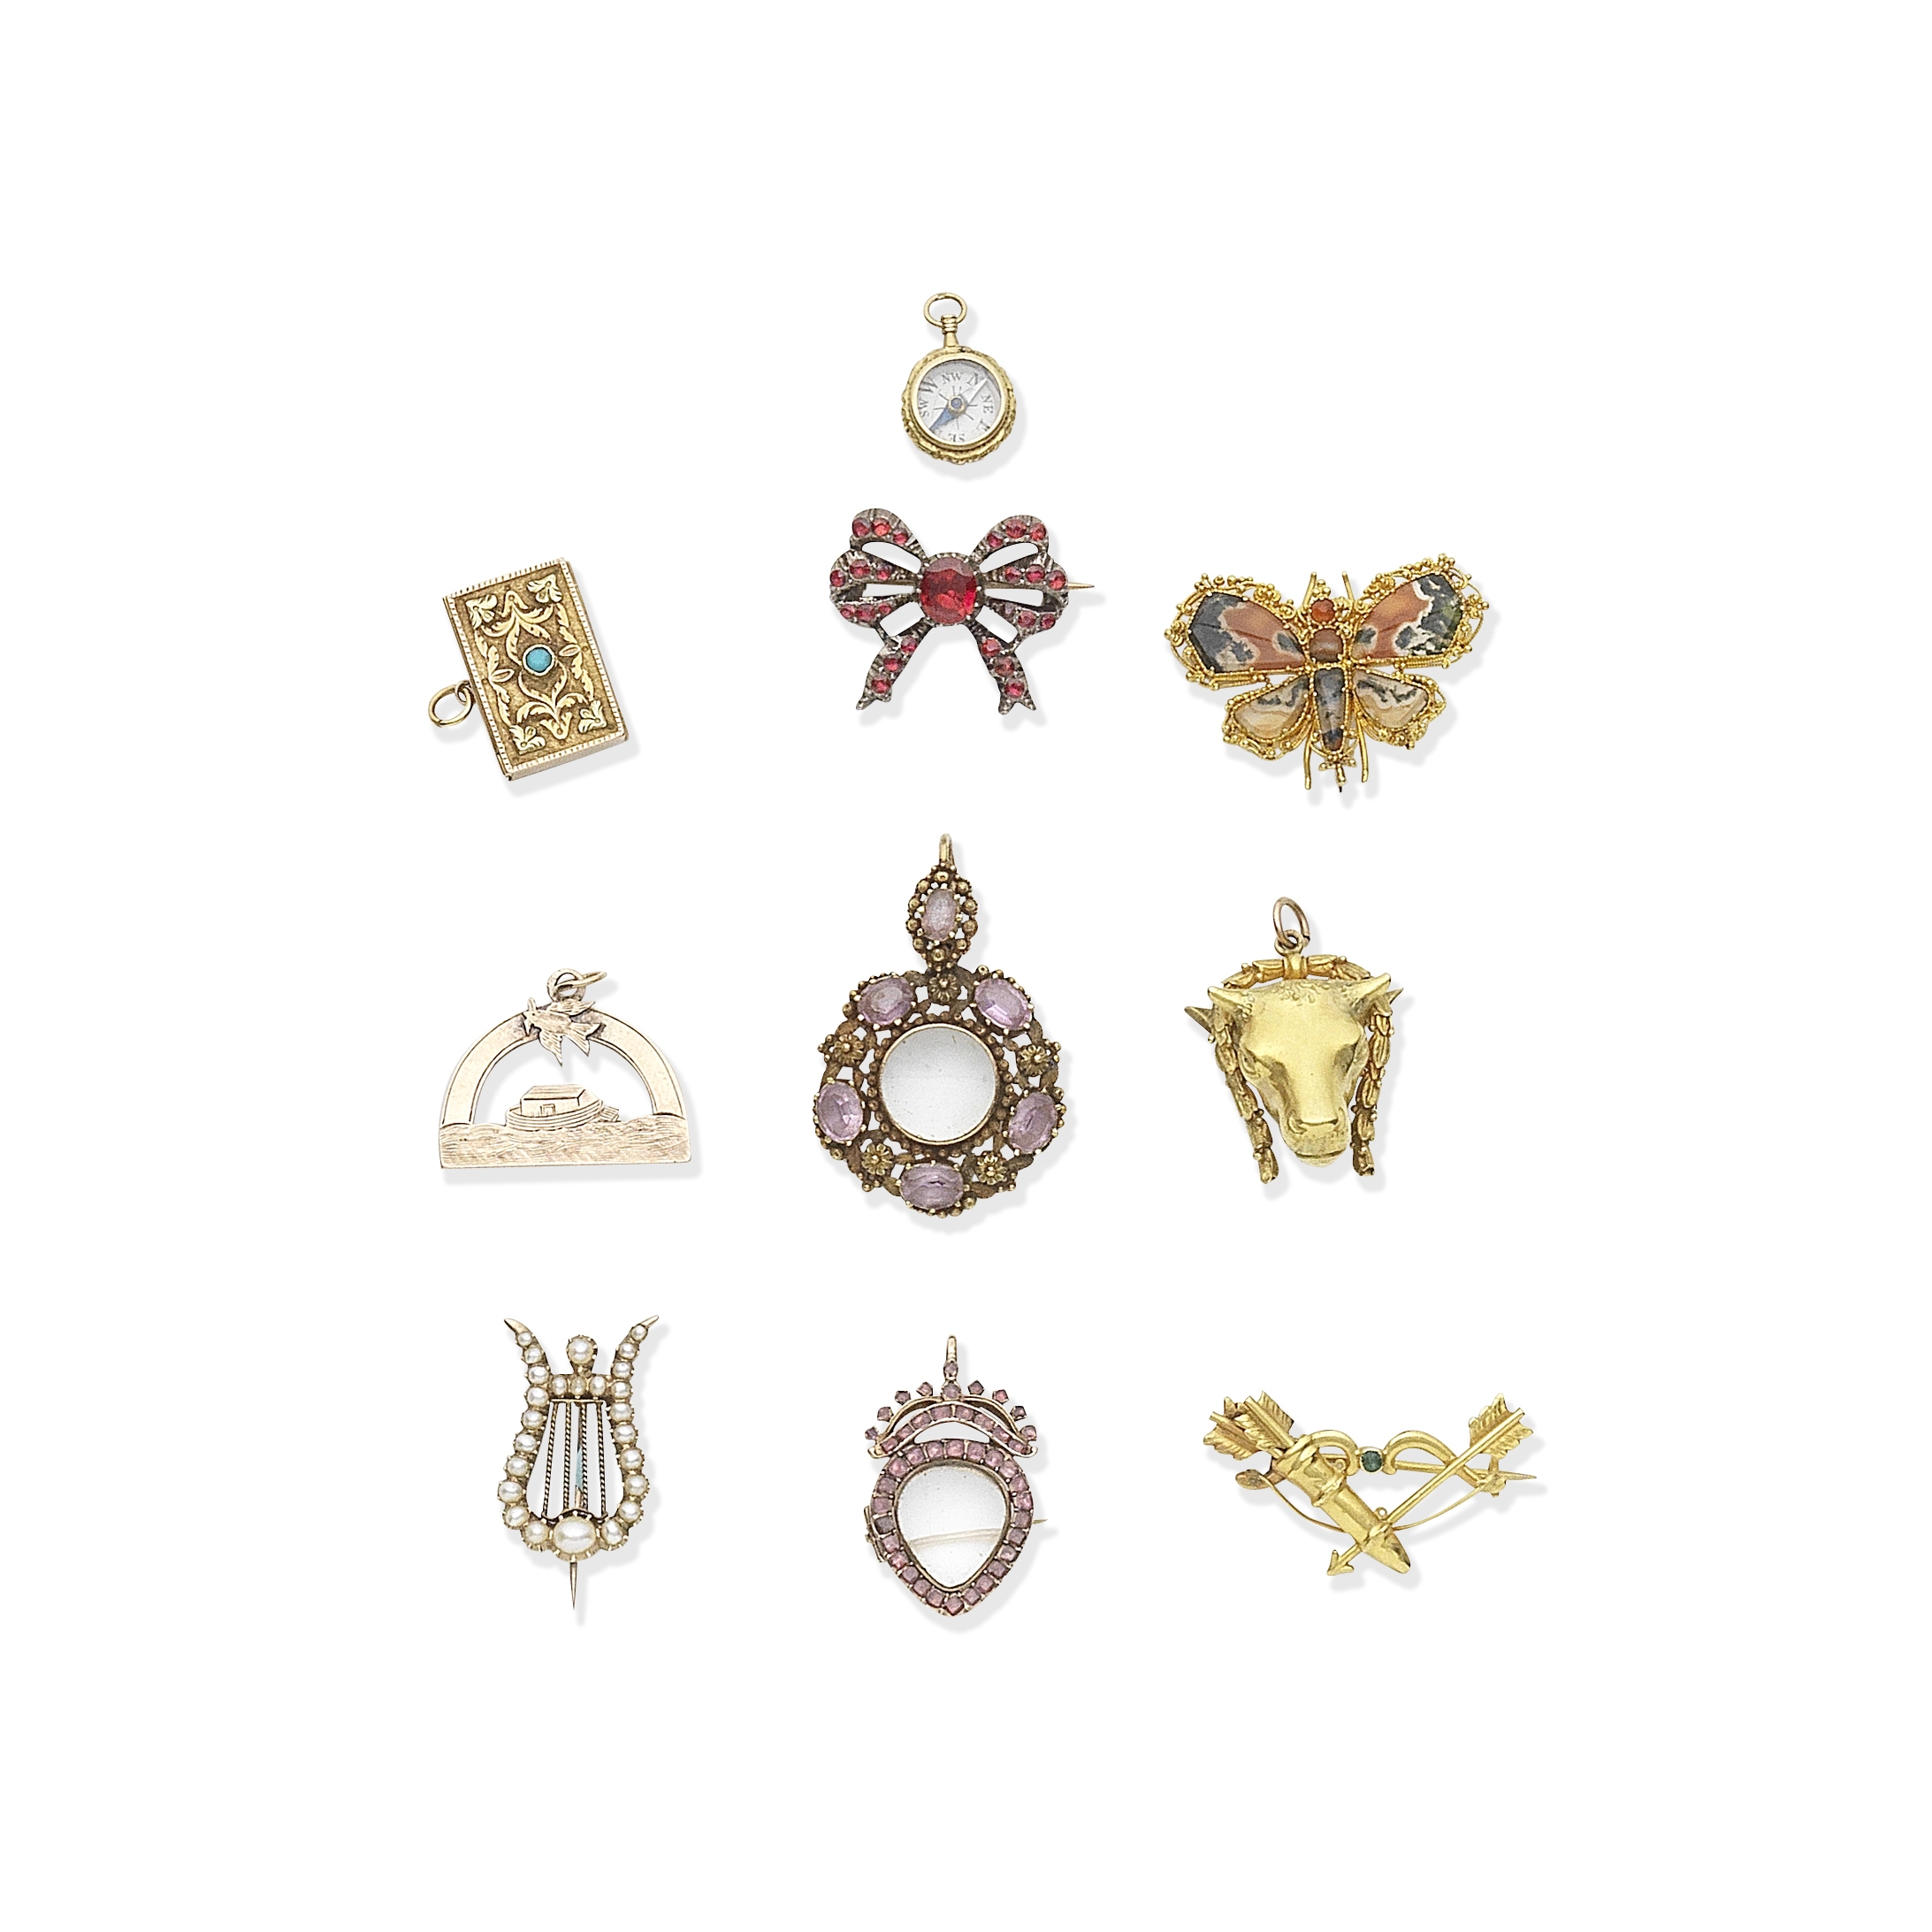 COLLECTION OF BROOCHES, PENDANTS AND CHARMS, (10)